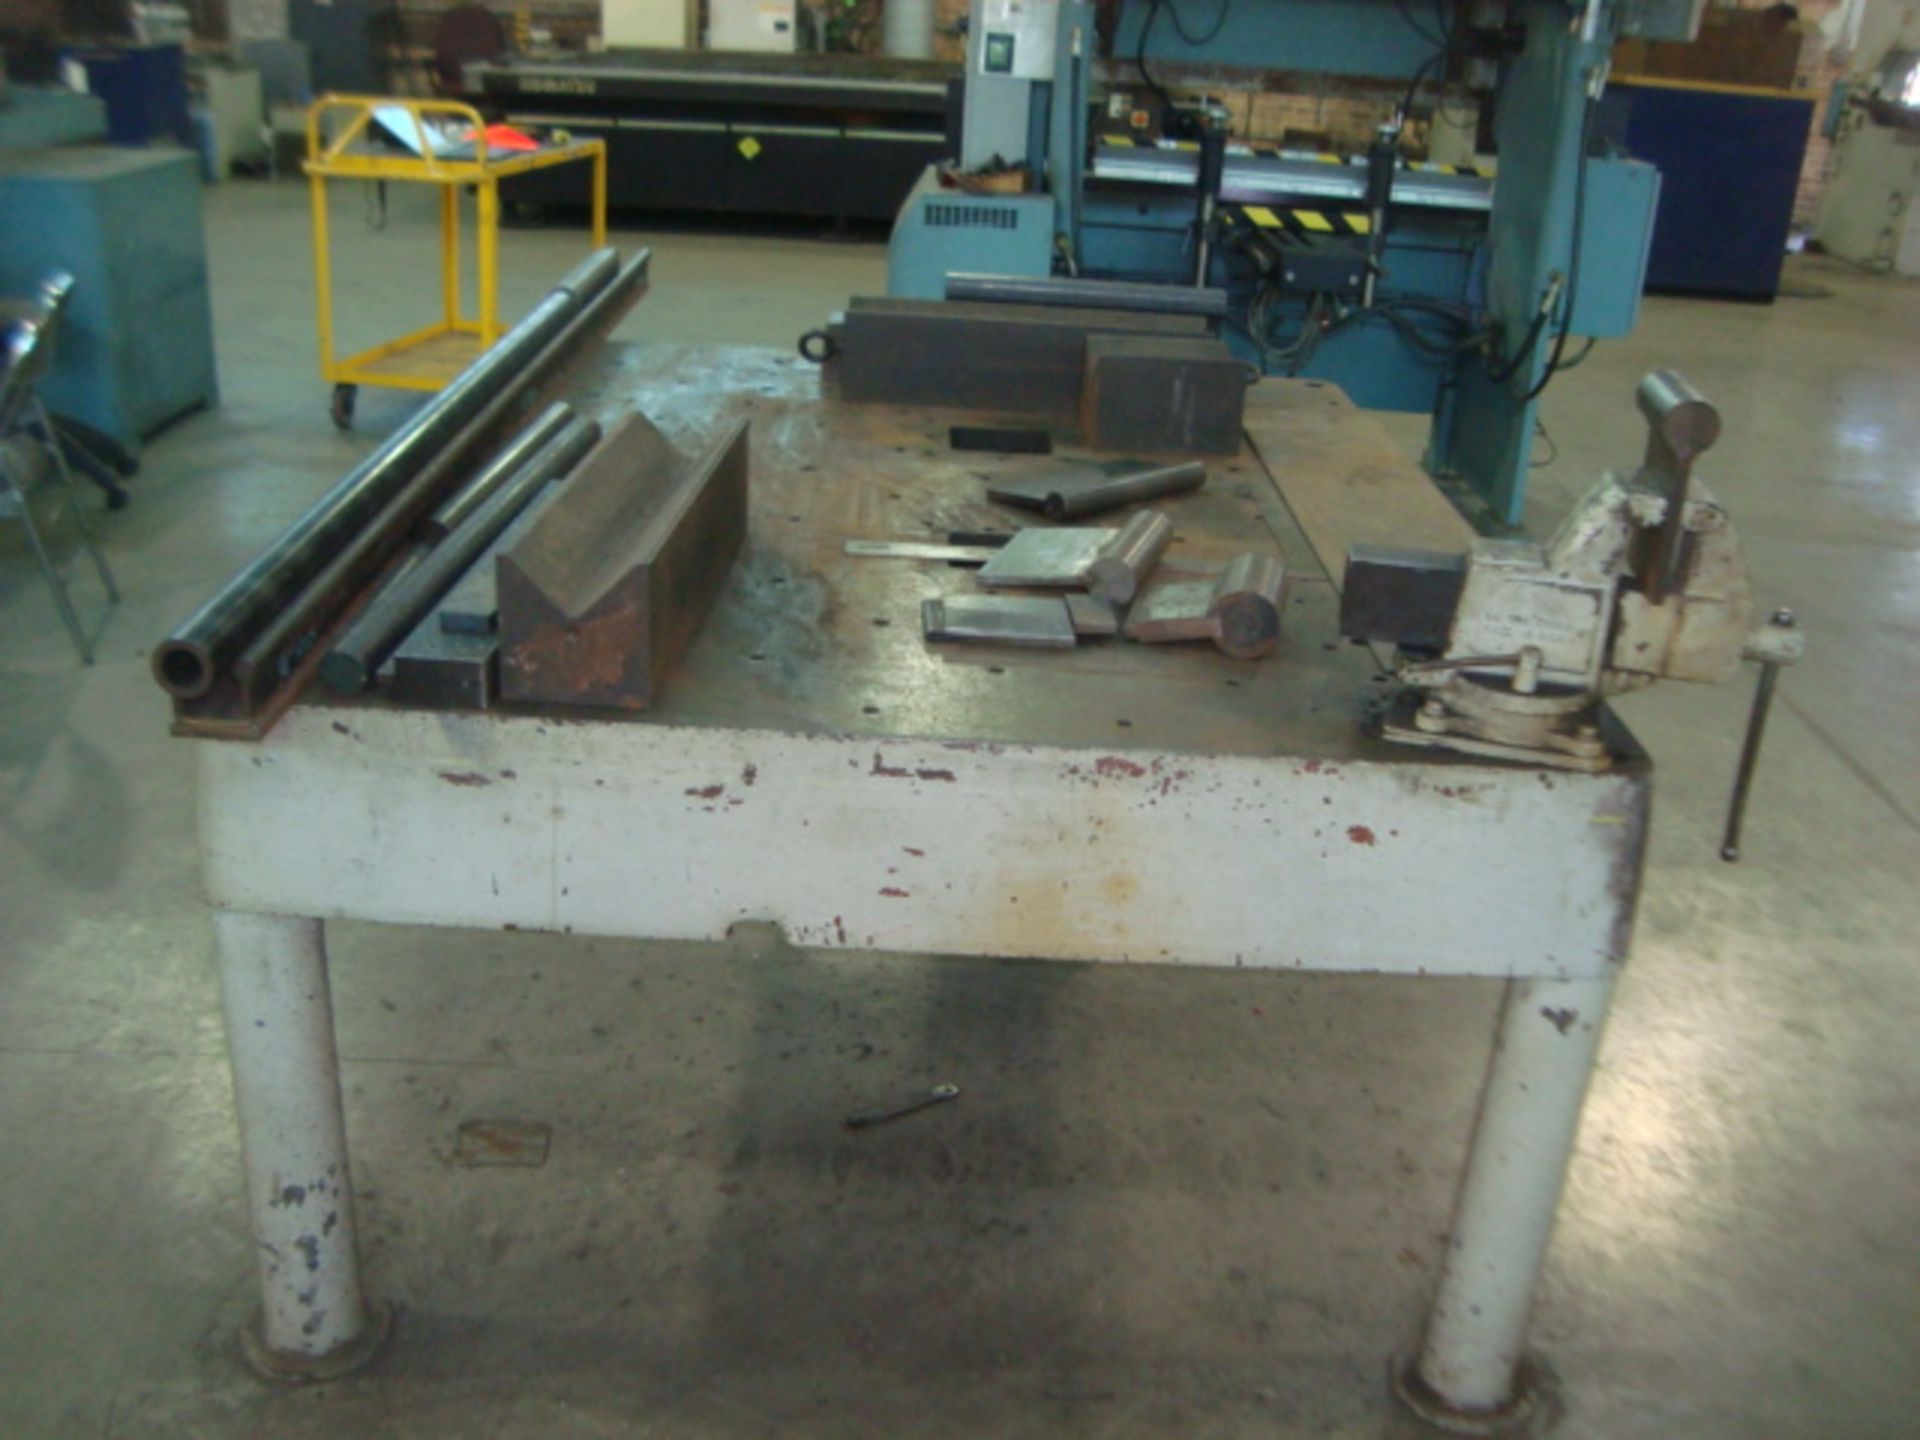 General Electric Heavy Duty Heavy Metals Steel Work Table/Bench With Craftsman Heavy Duty Bench - Image 5 of 5